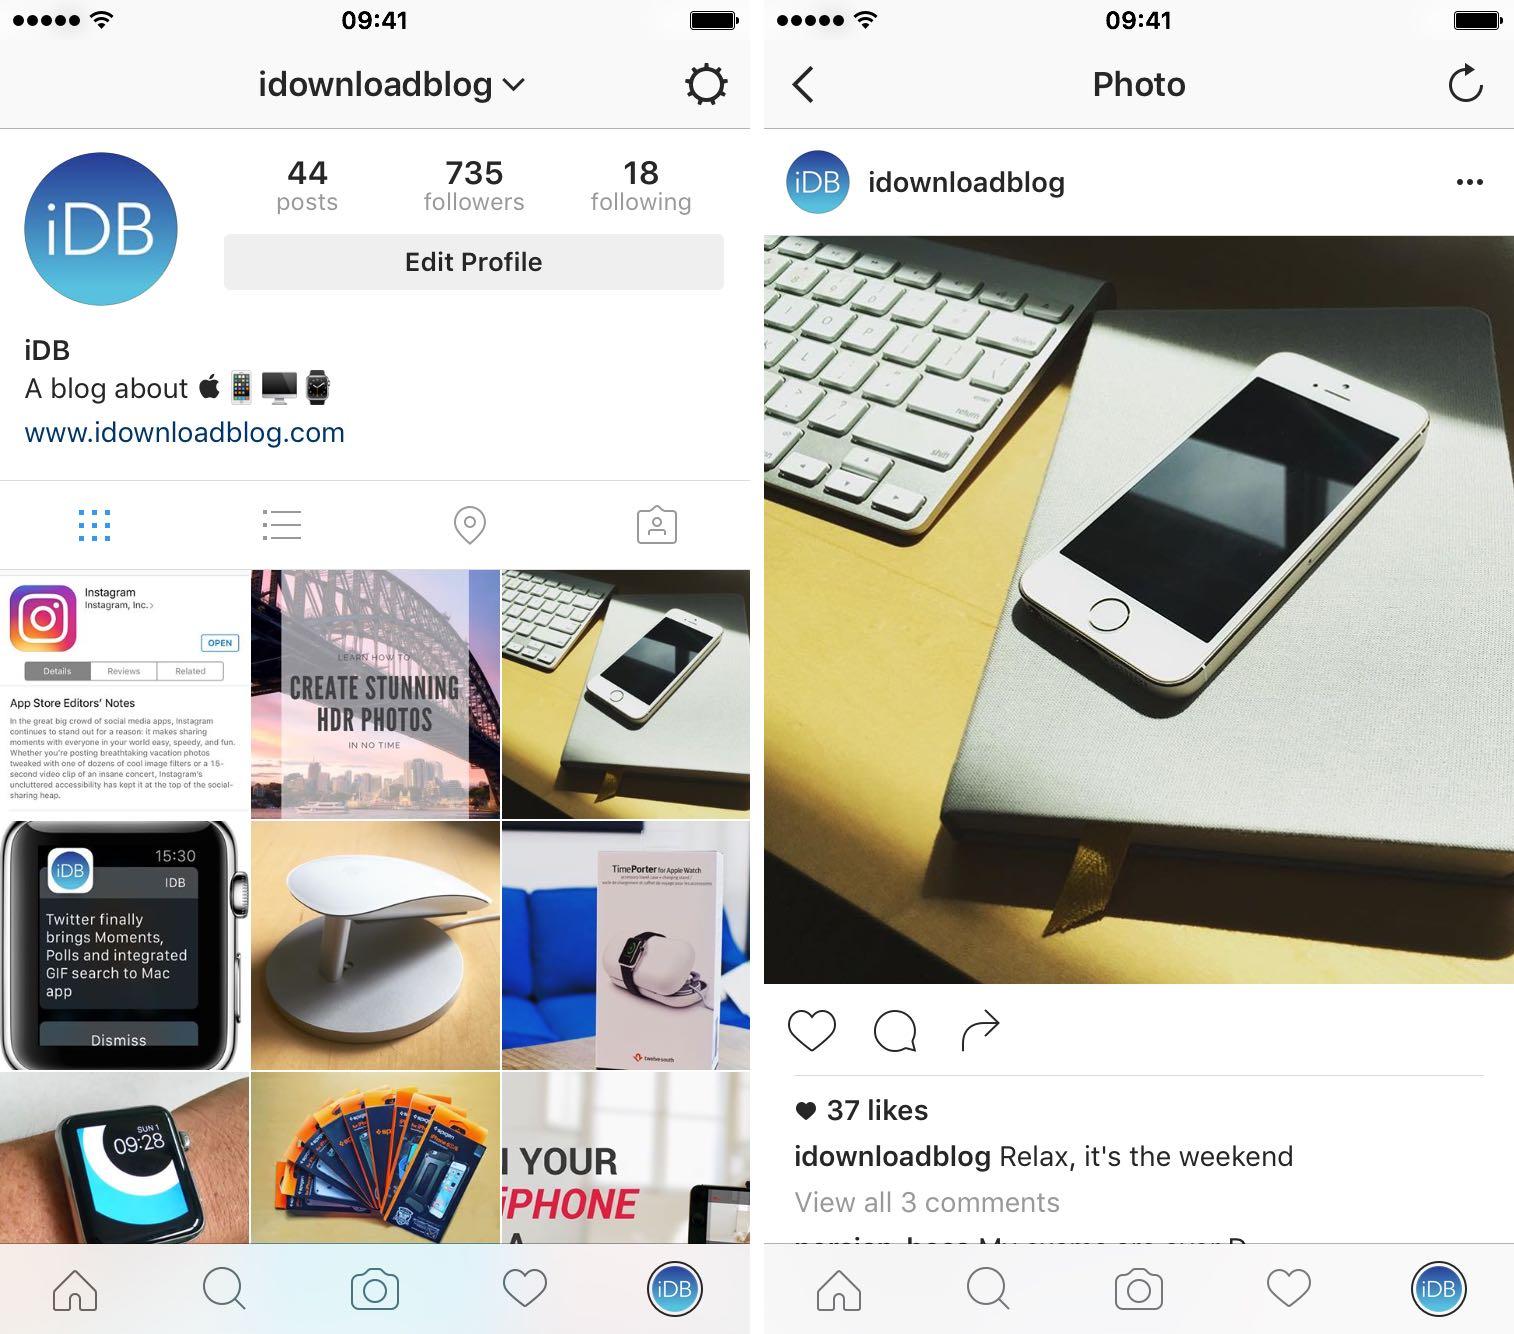 iPhone Instagram App Logo - Instagram revamps app with new icon and monochromatic interface